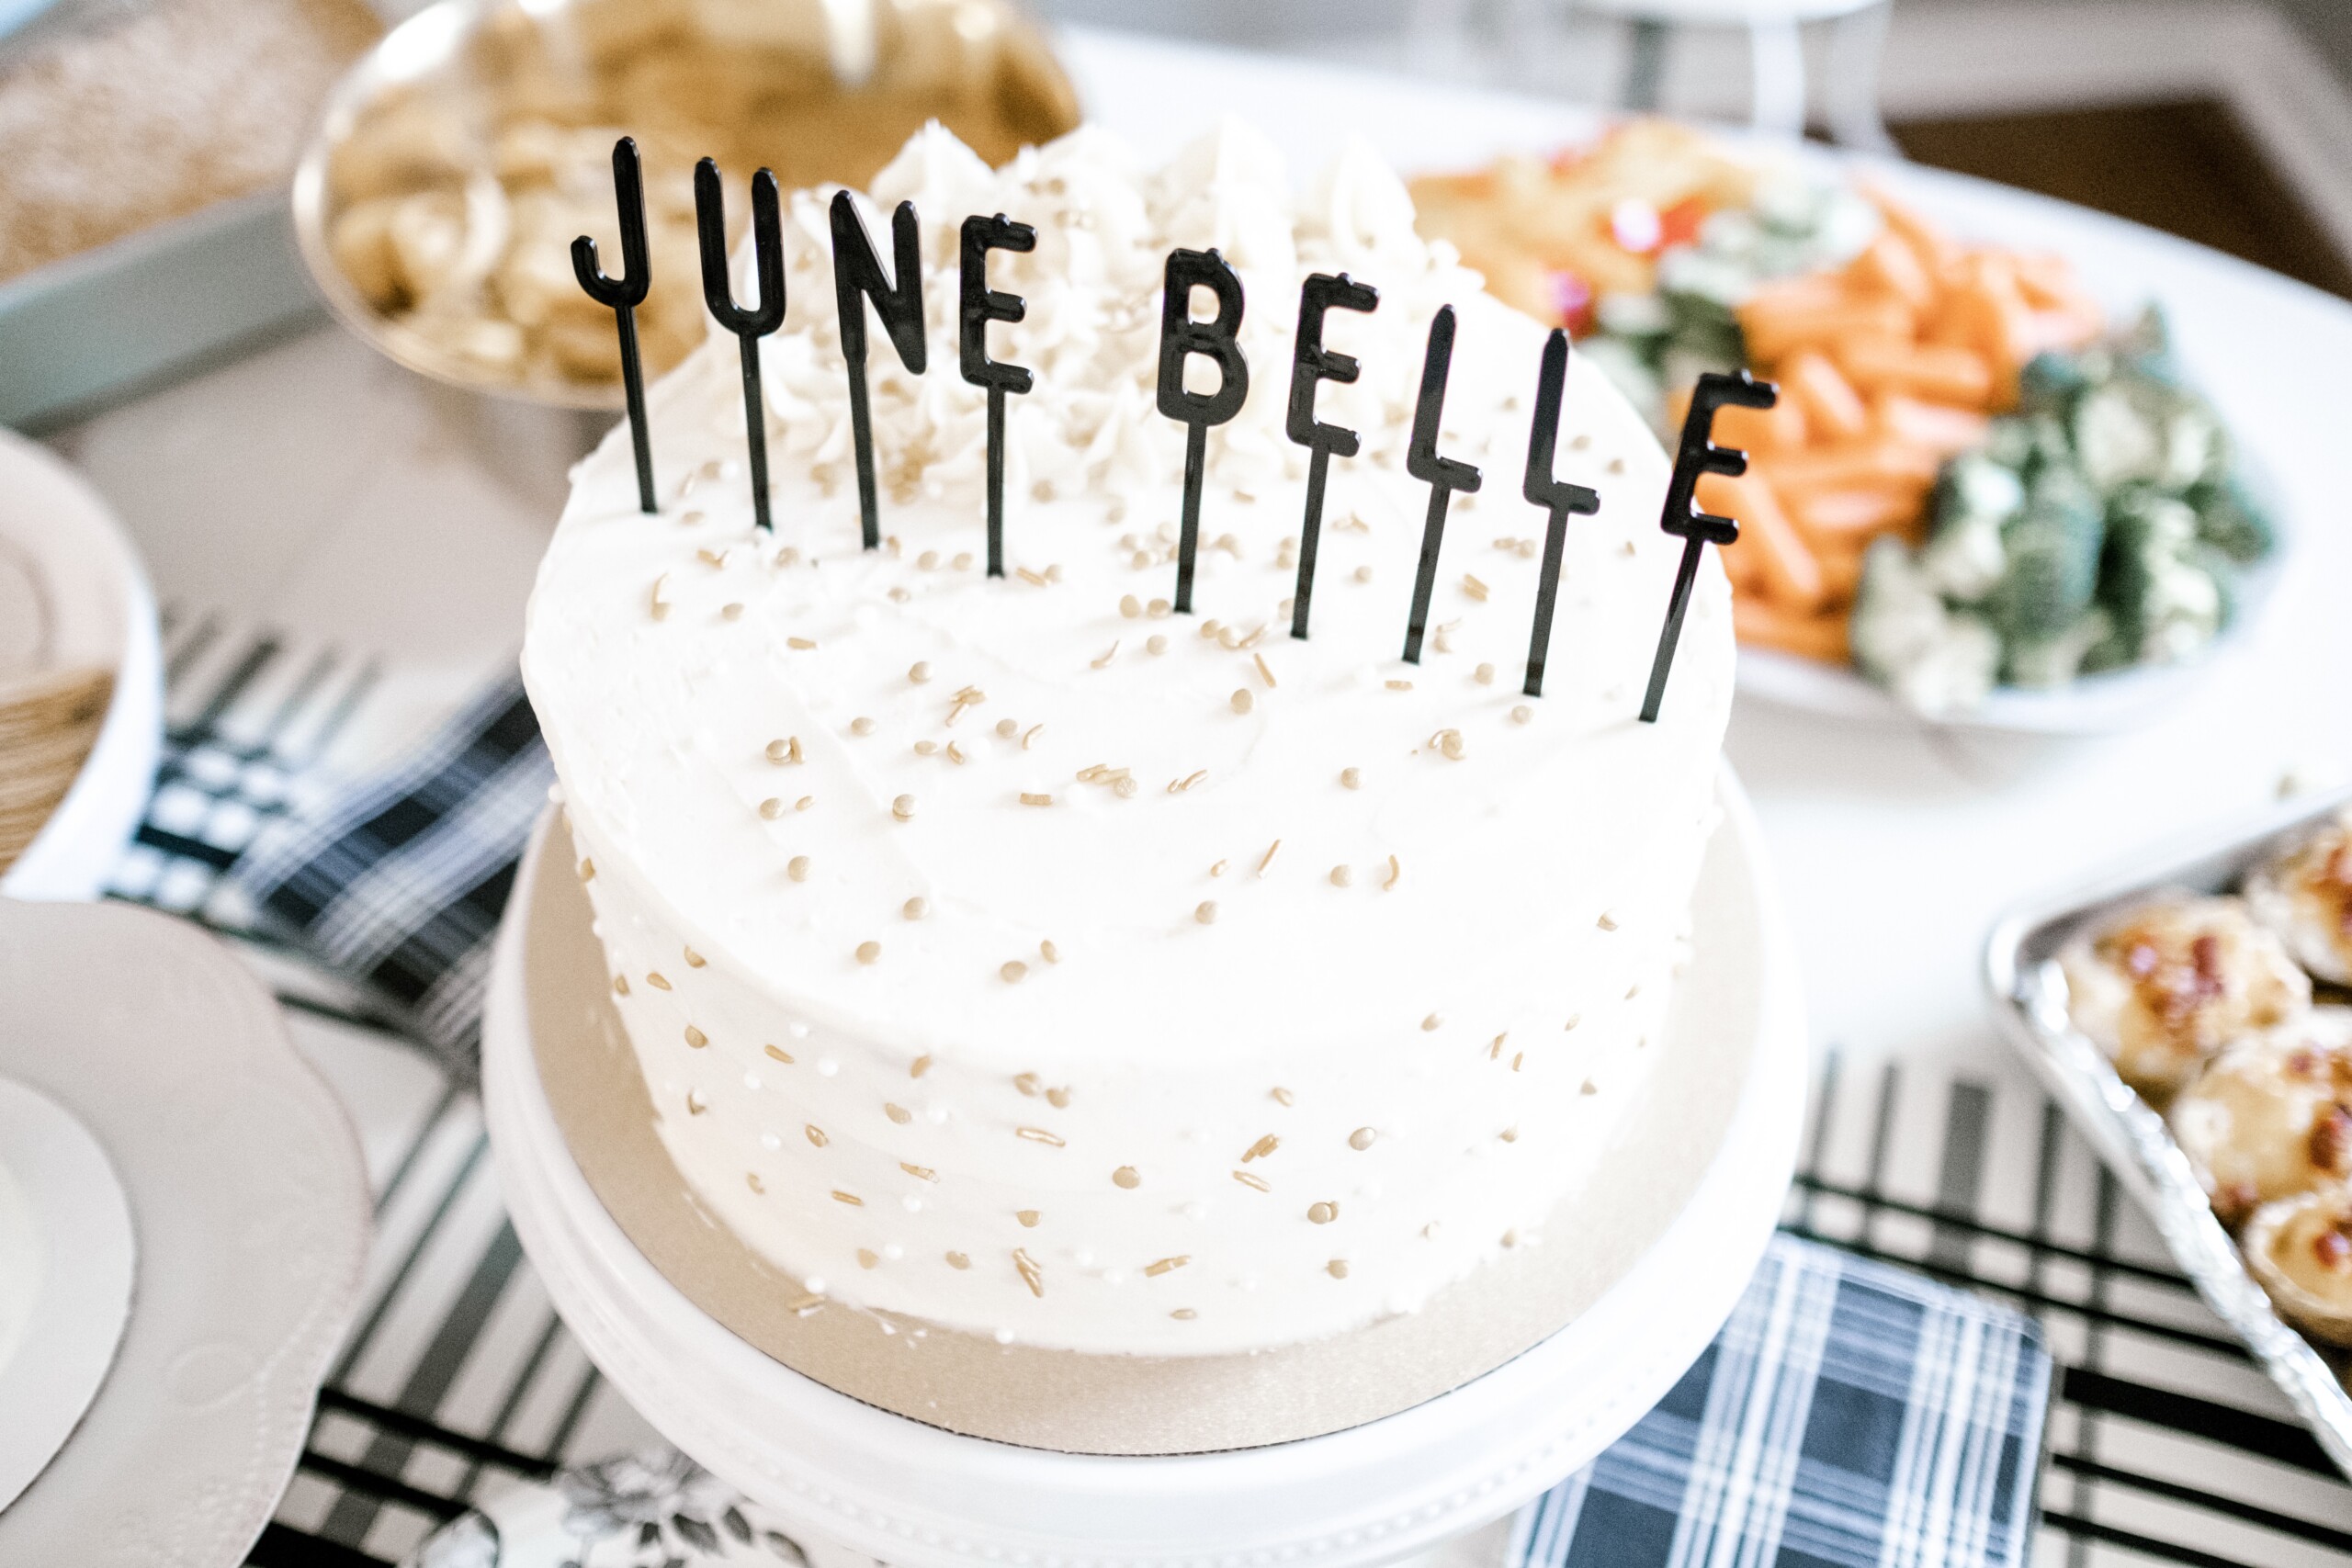 June Belle's First Birthday Party featured on Nashville Baby Guide